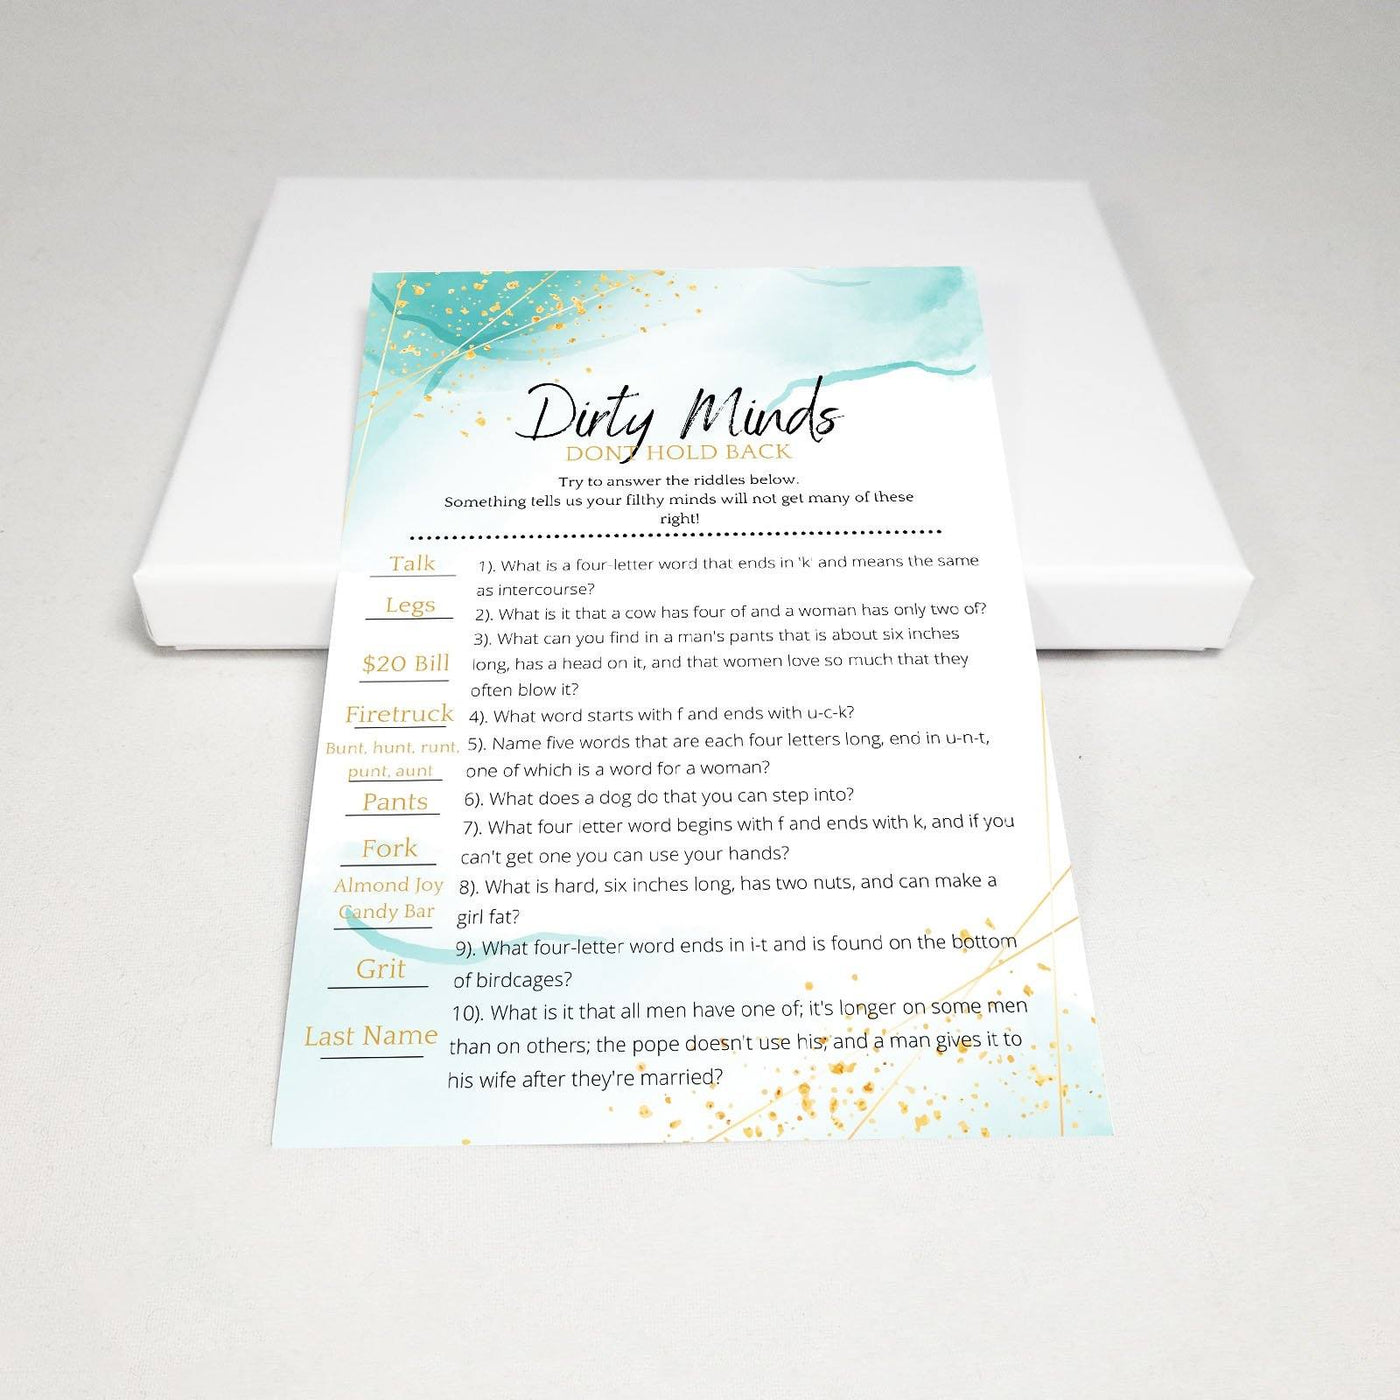 Ocean Gold - Dirty Minds | Bridal Shower Game Party Games Your Party Games 